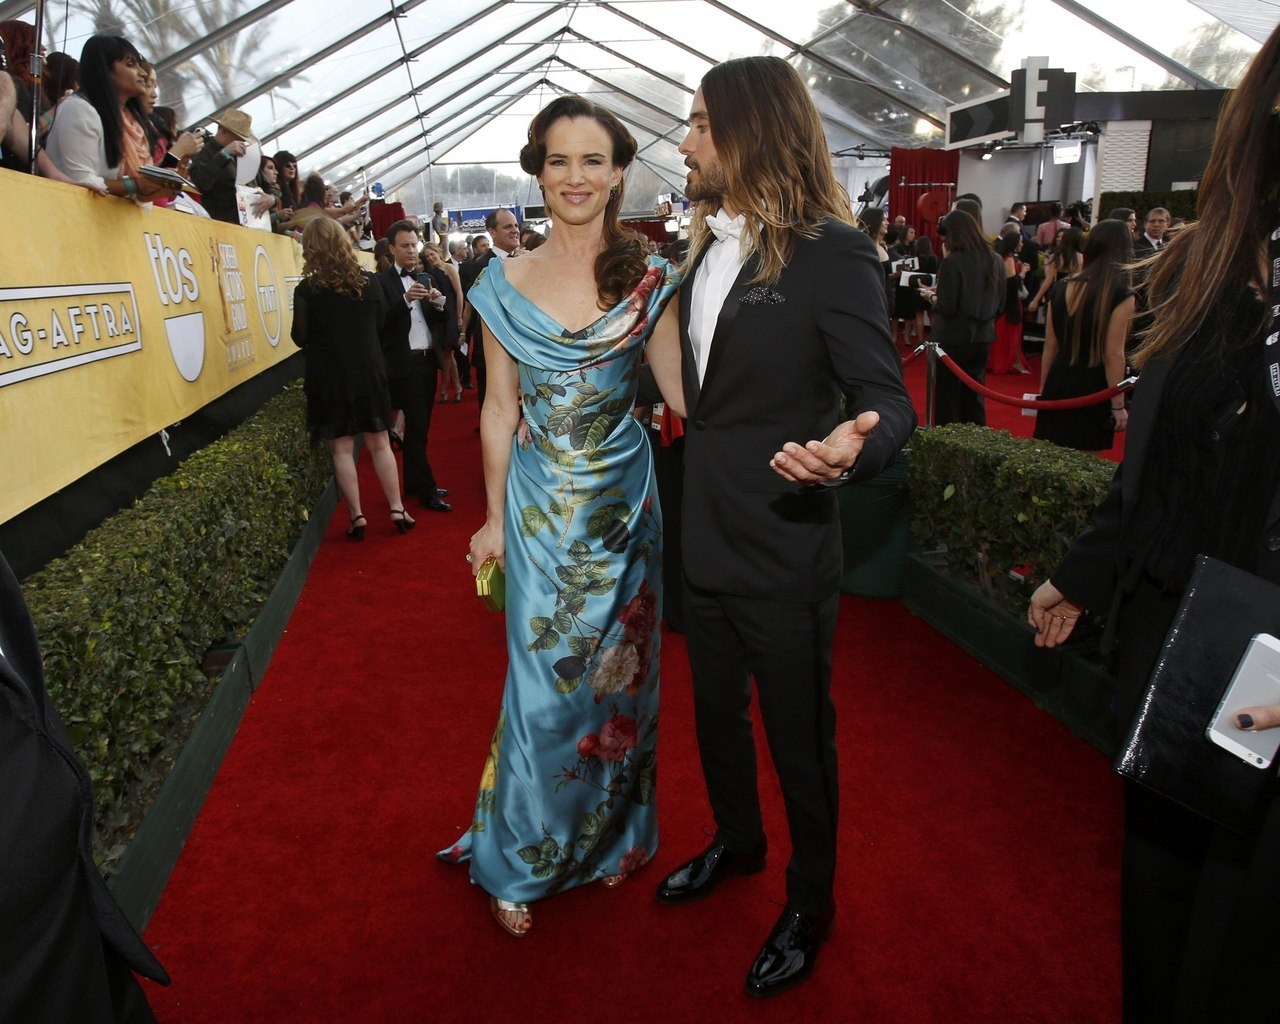 Juliette Lewis and Jared Leto for 1280 x 1024 resolution